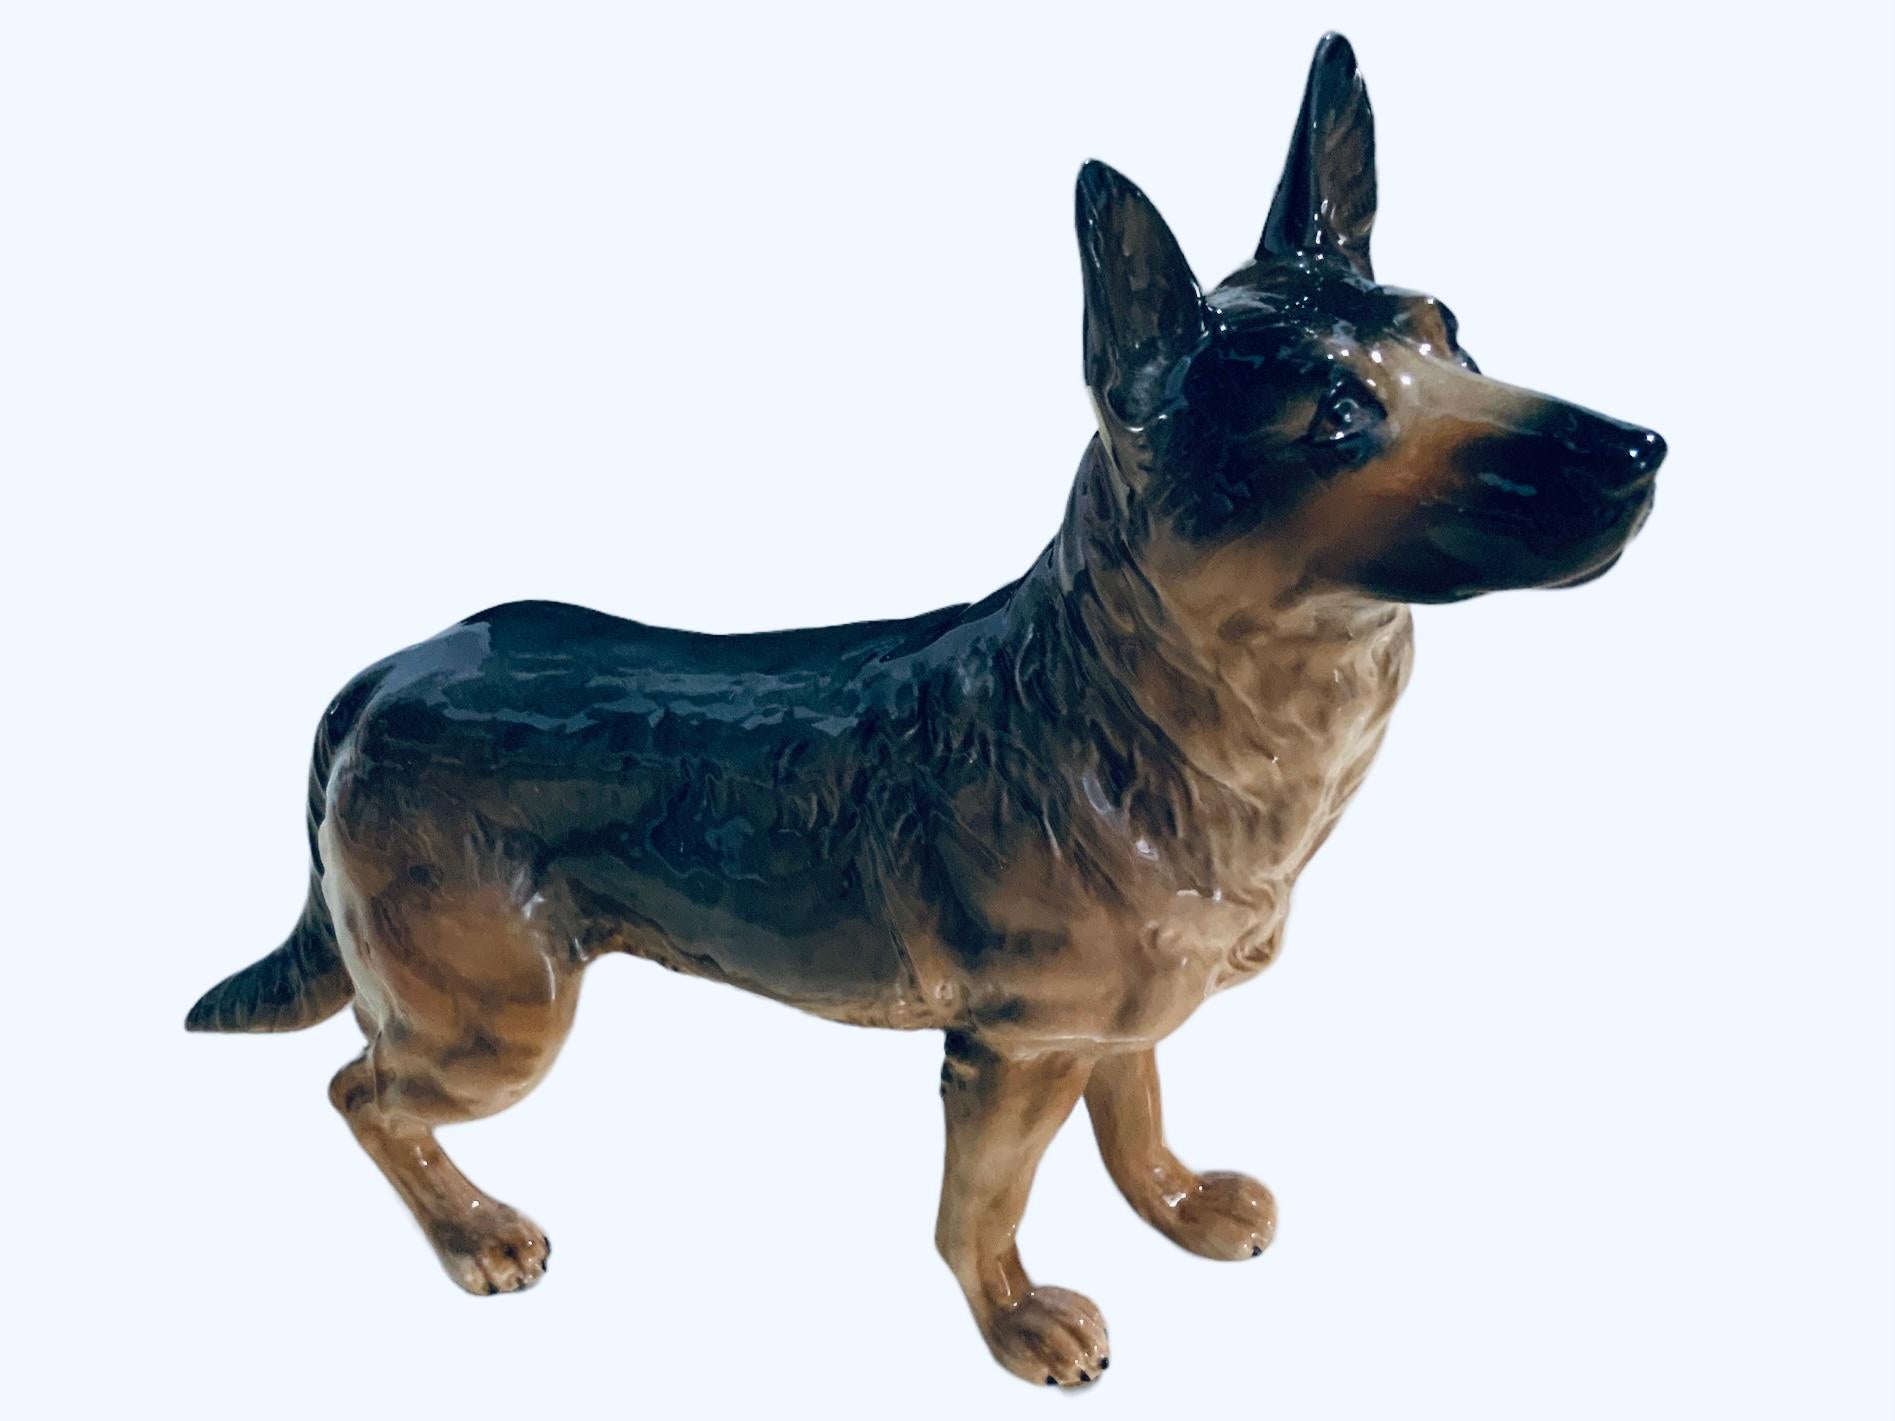 This is a Goeble porcelain figurine of a dog. It depicts a very well done hand painted German Shepherd dog. He is standing up very proud of himself, but with a sweet gaze. The Goeble hallmark is below the figurine.